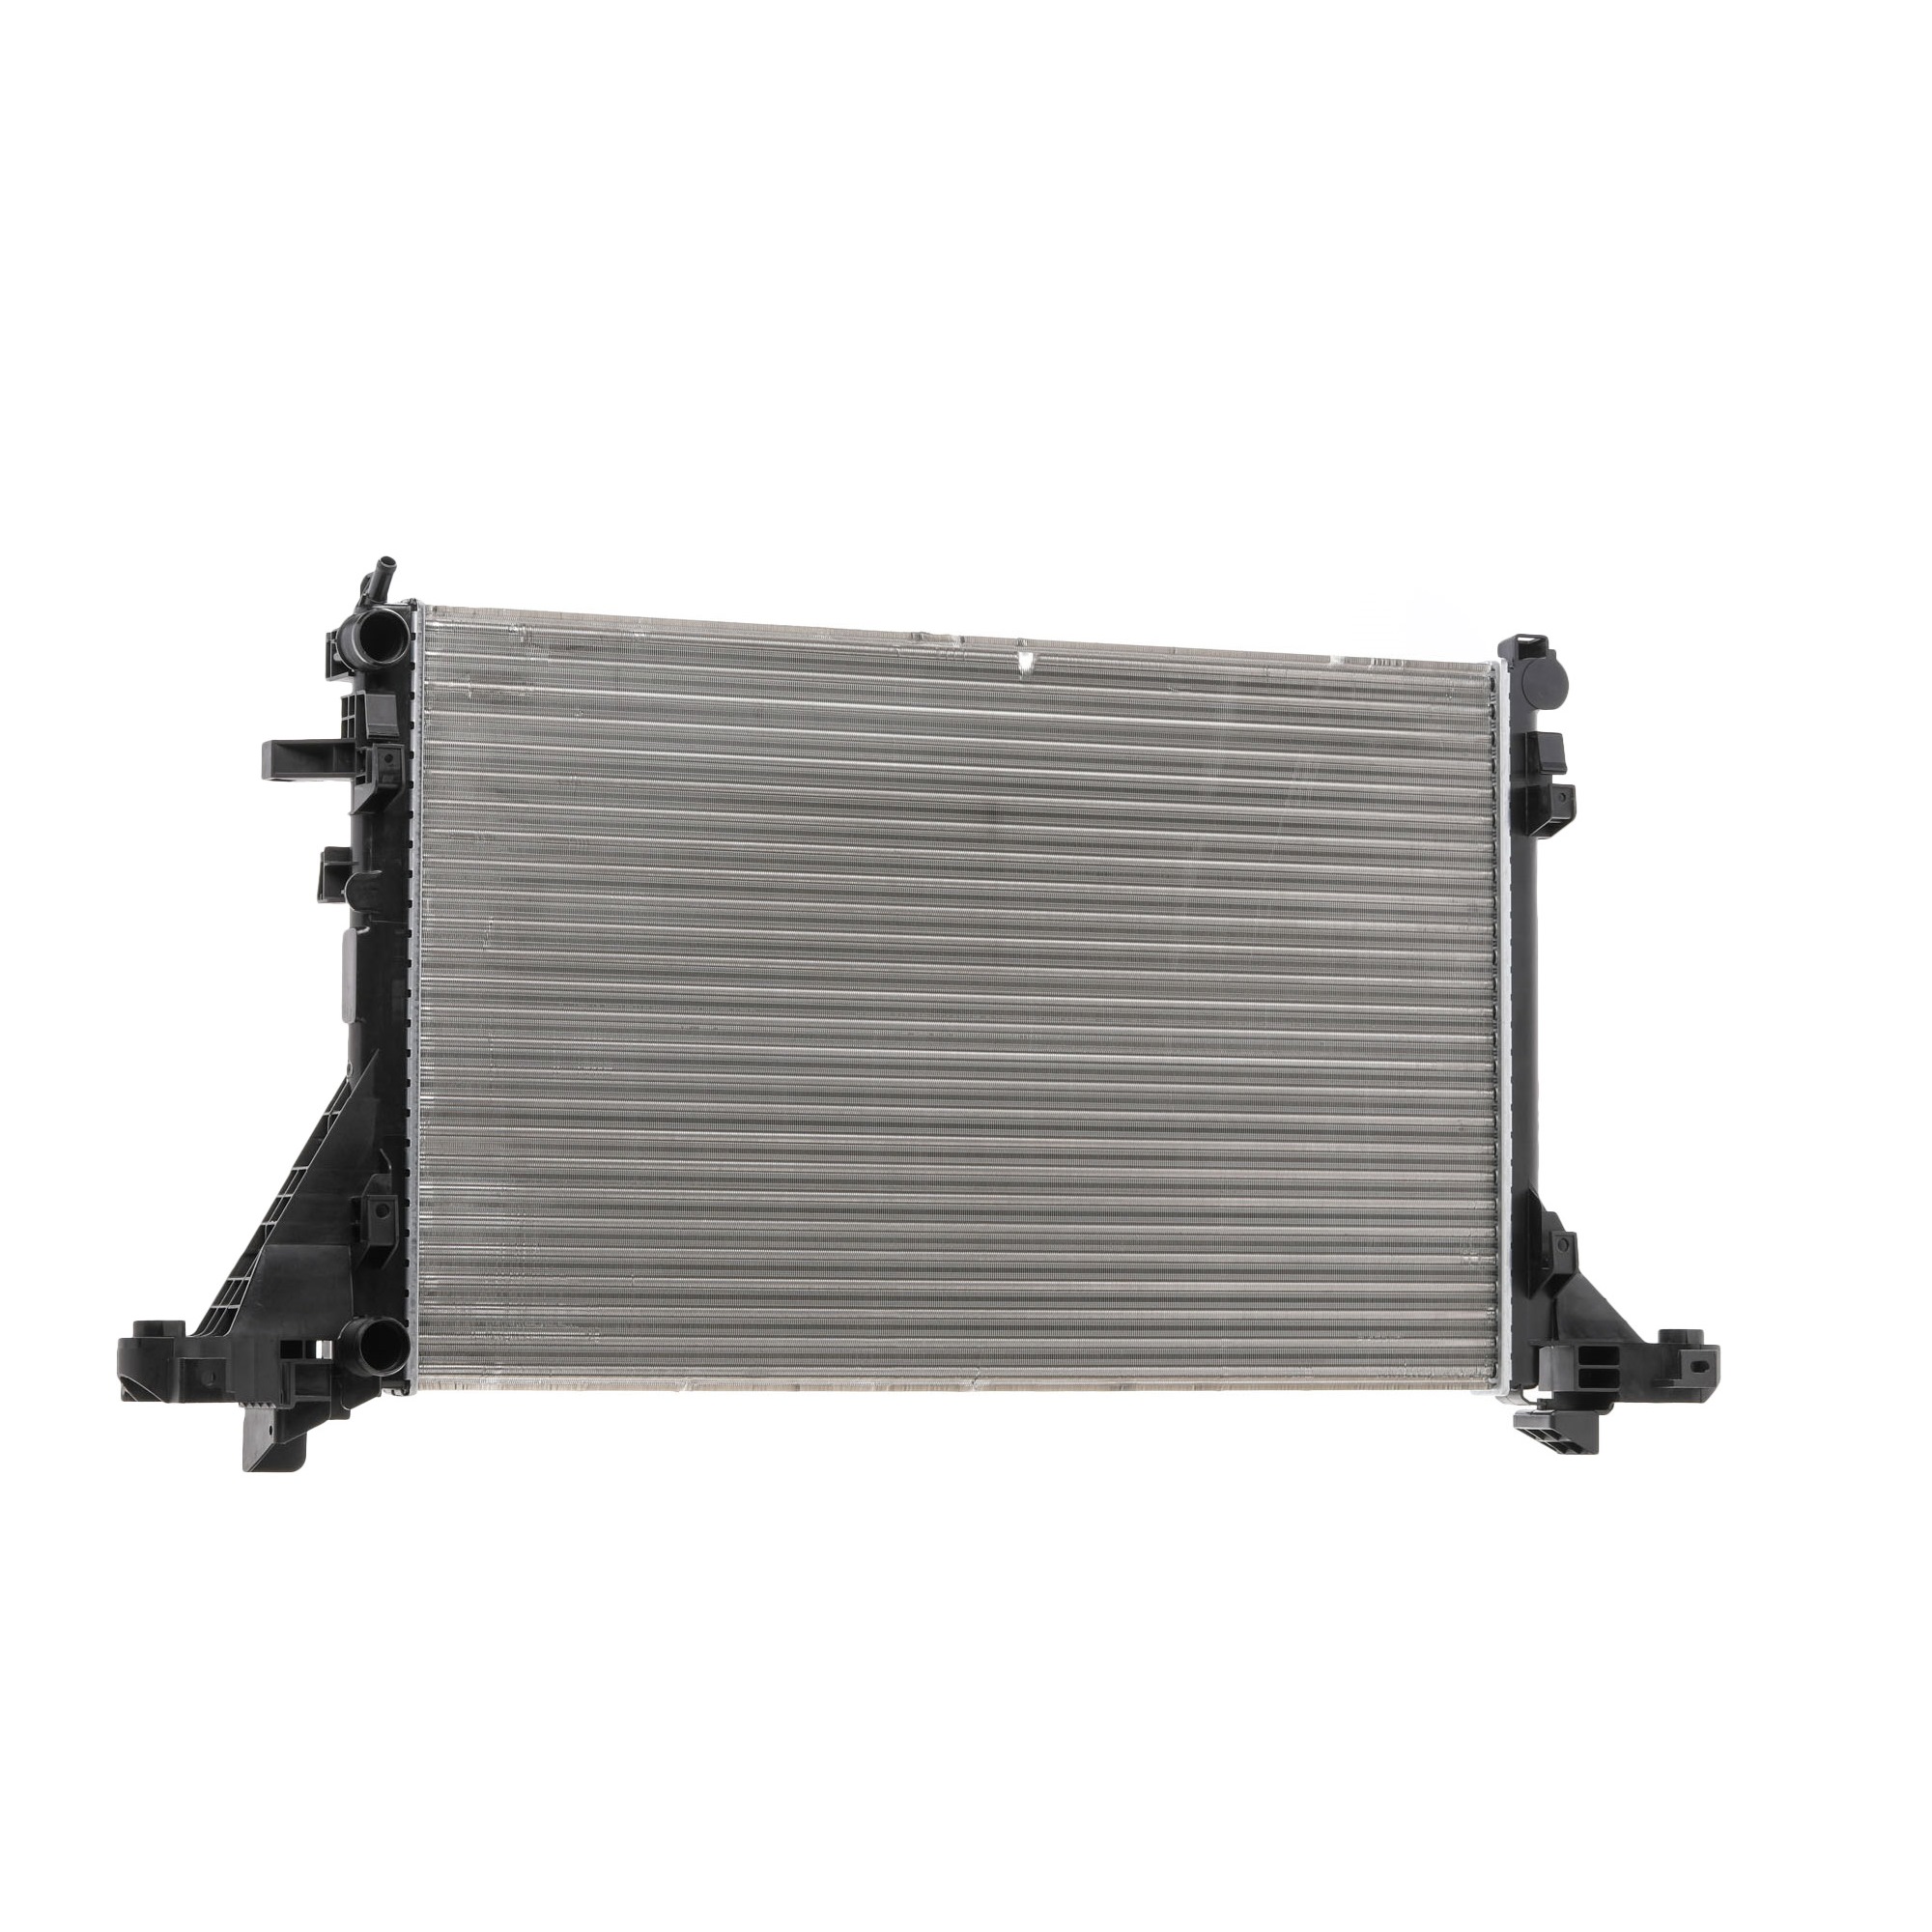 STARK Aluminium, for vehicles without air conditioning, 776 x 480 x 26 mm, Manual Transmission, Mechanically jointed cooling fins Radiator SKRD-0121257 buy